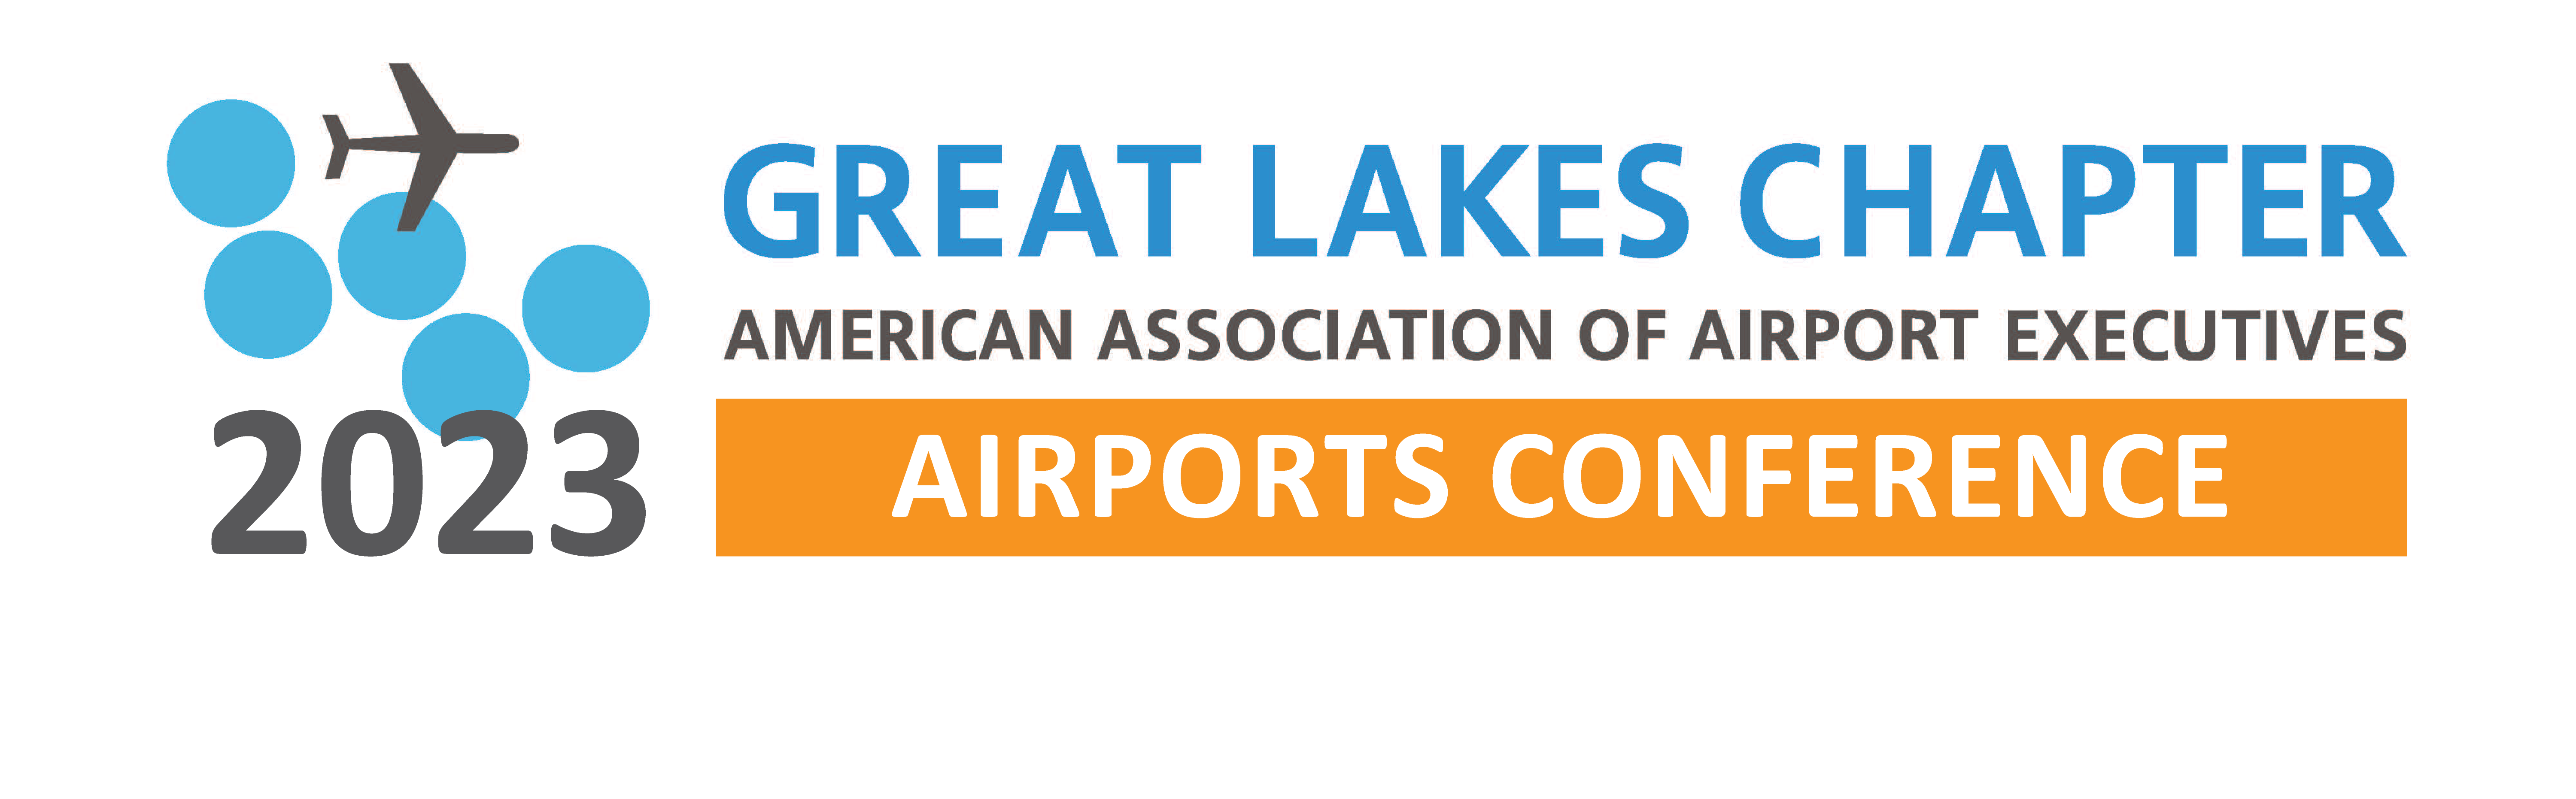 Airports Conference